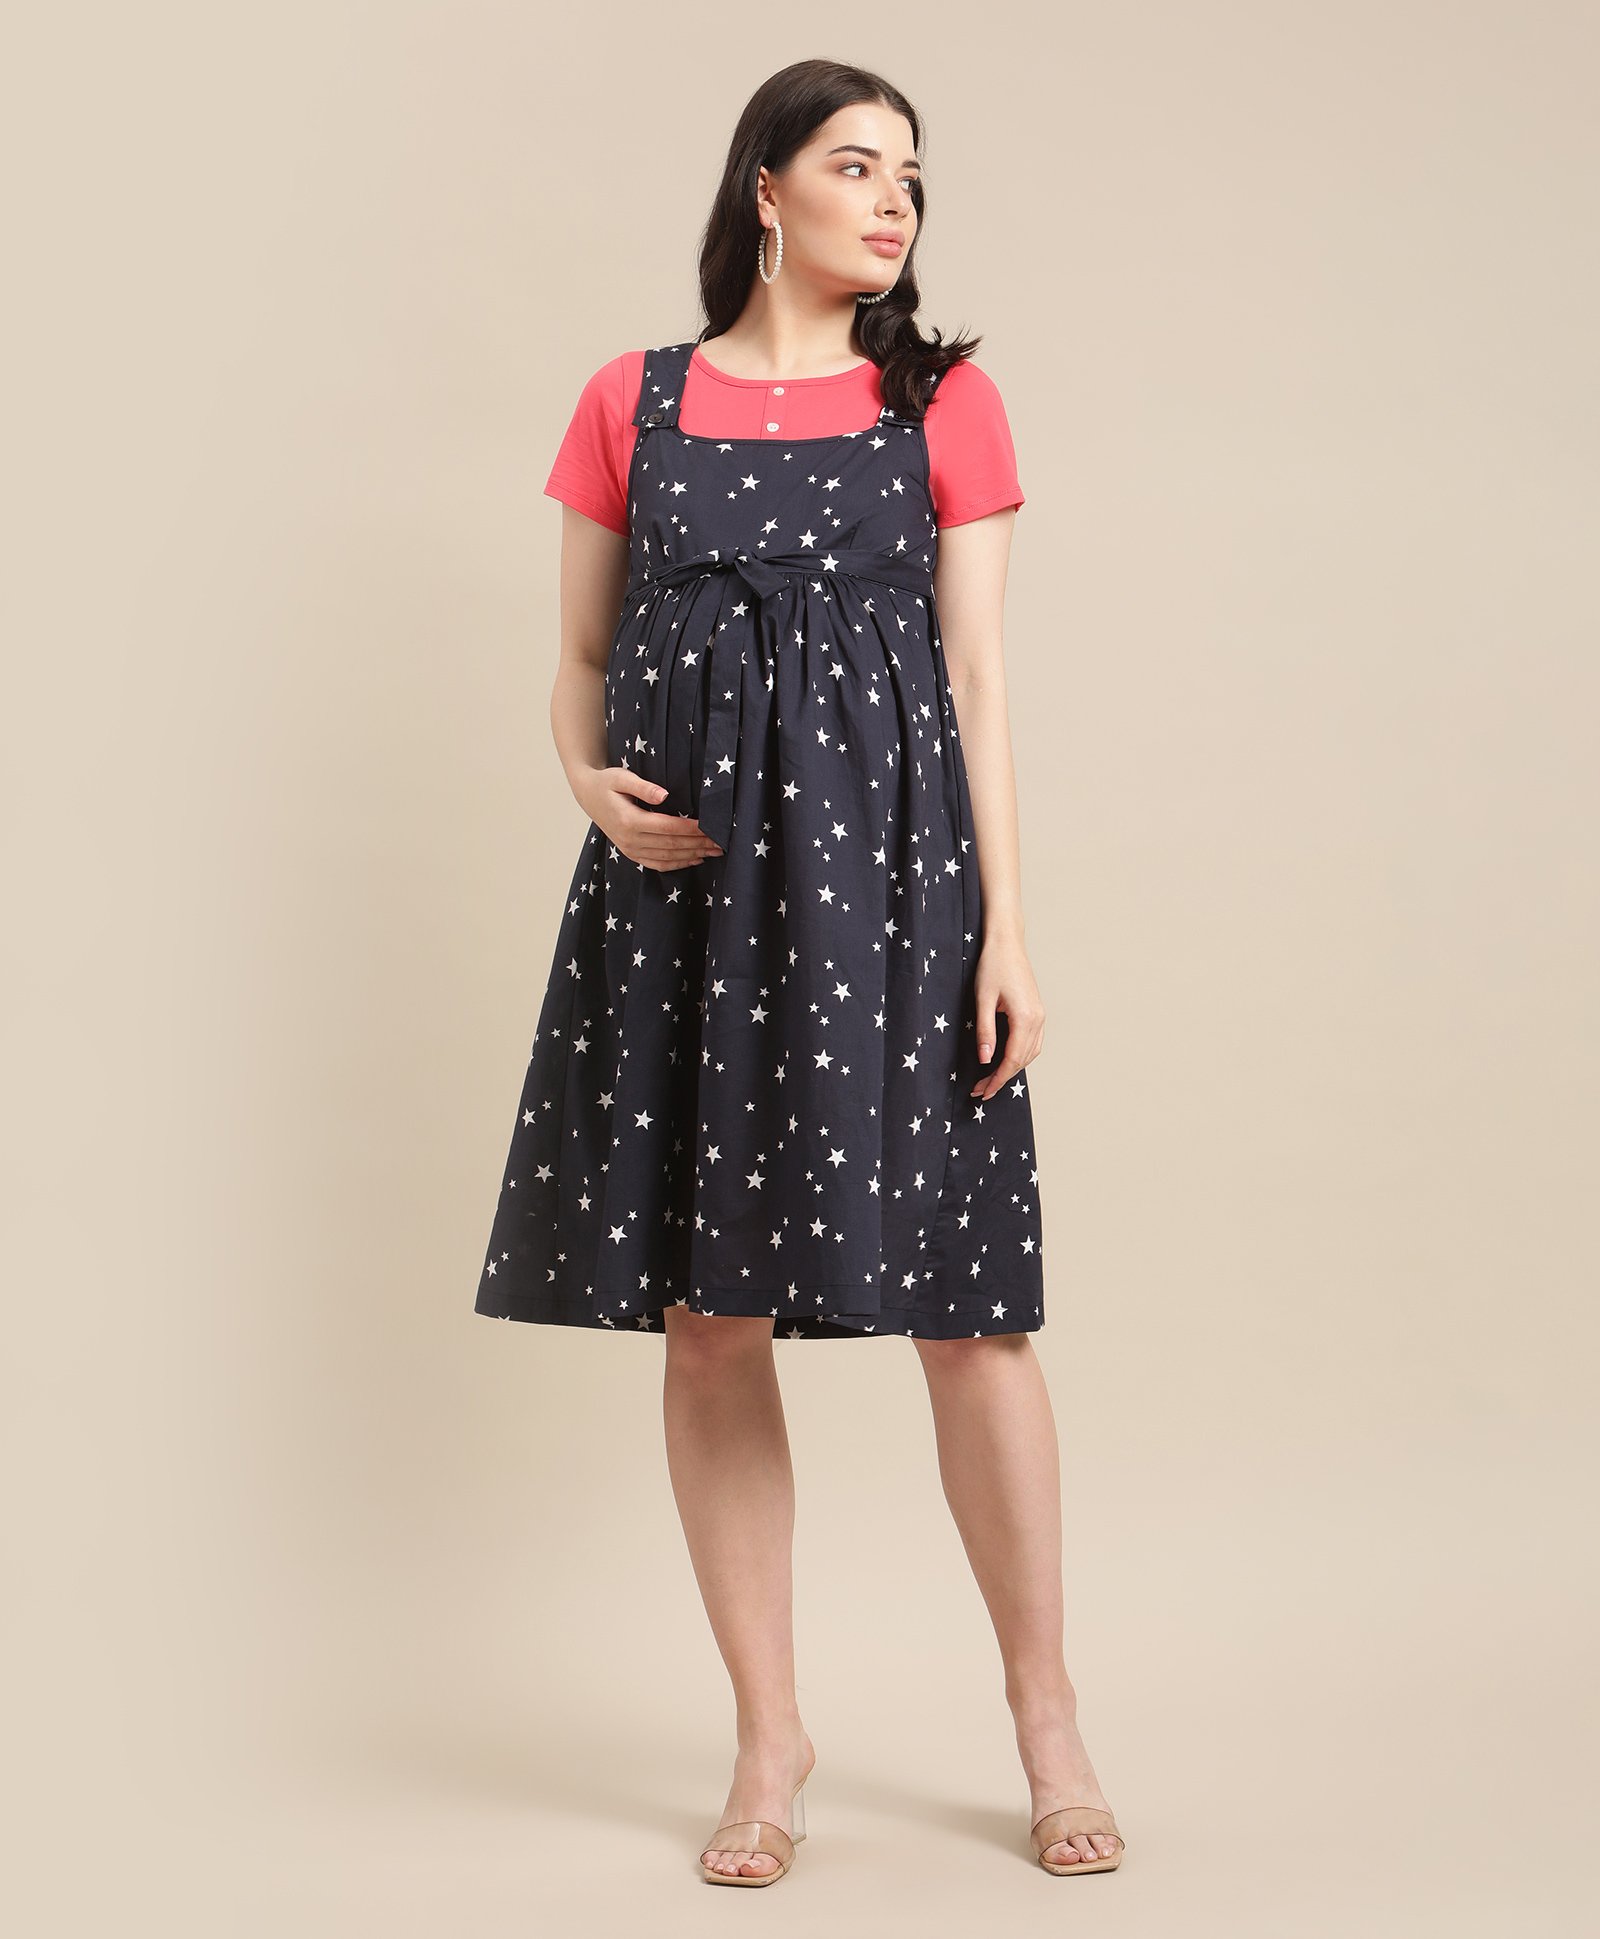 Bella Mama Maternity Dress with Half Sleeves Inner Tee Star Print - Navy  Blue Pink Online in India, Buy at Best Price from FirstCry.com - 9981642